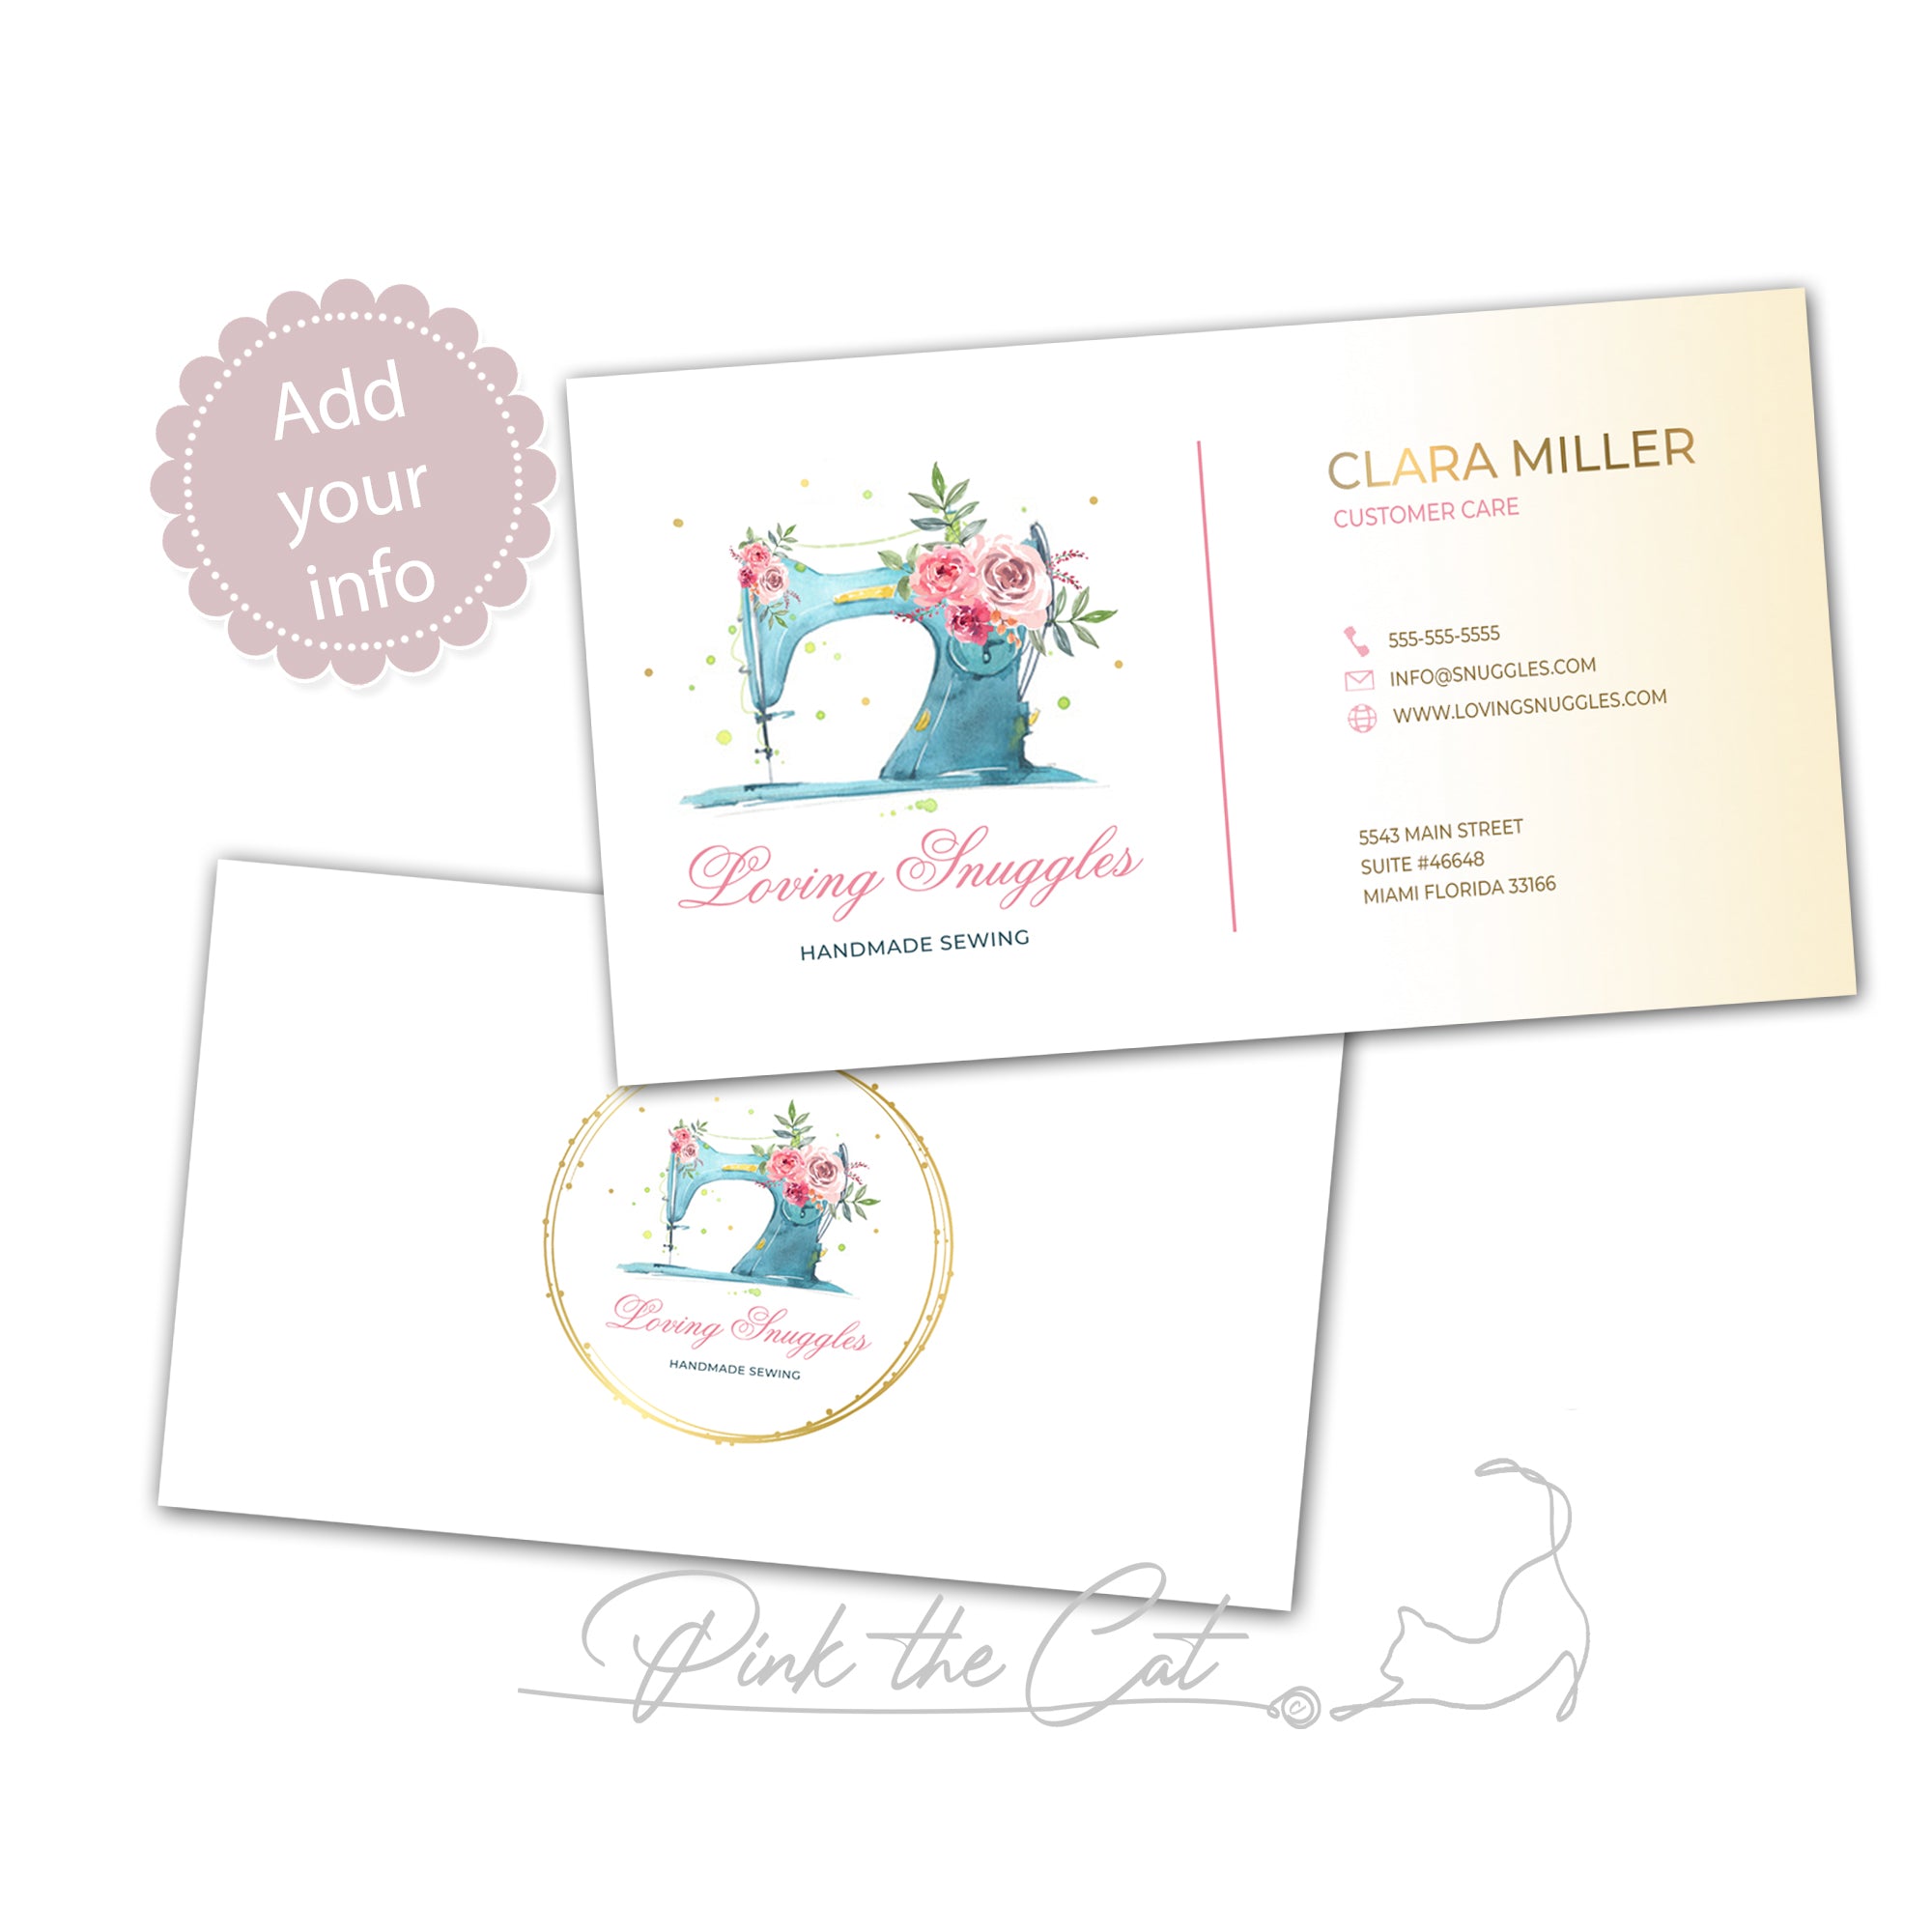 Premade sewing business card